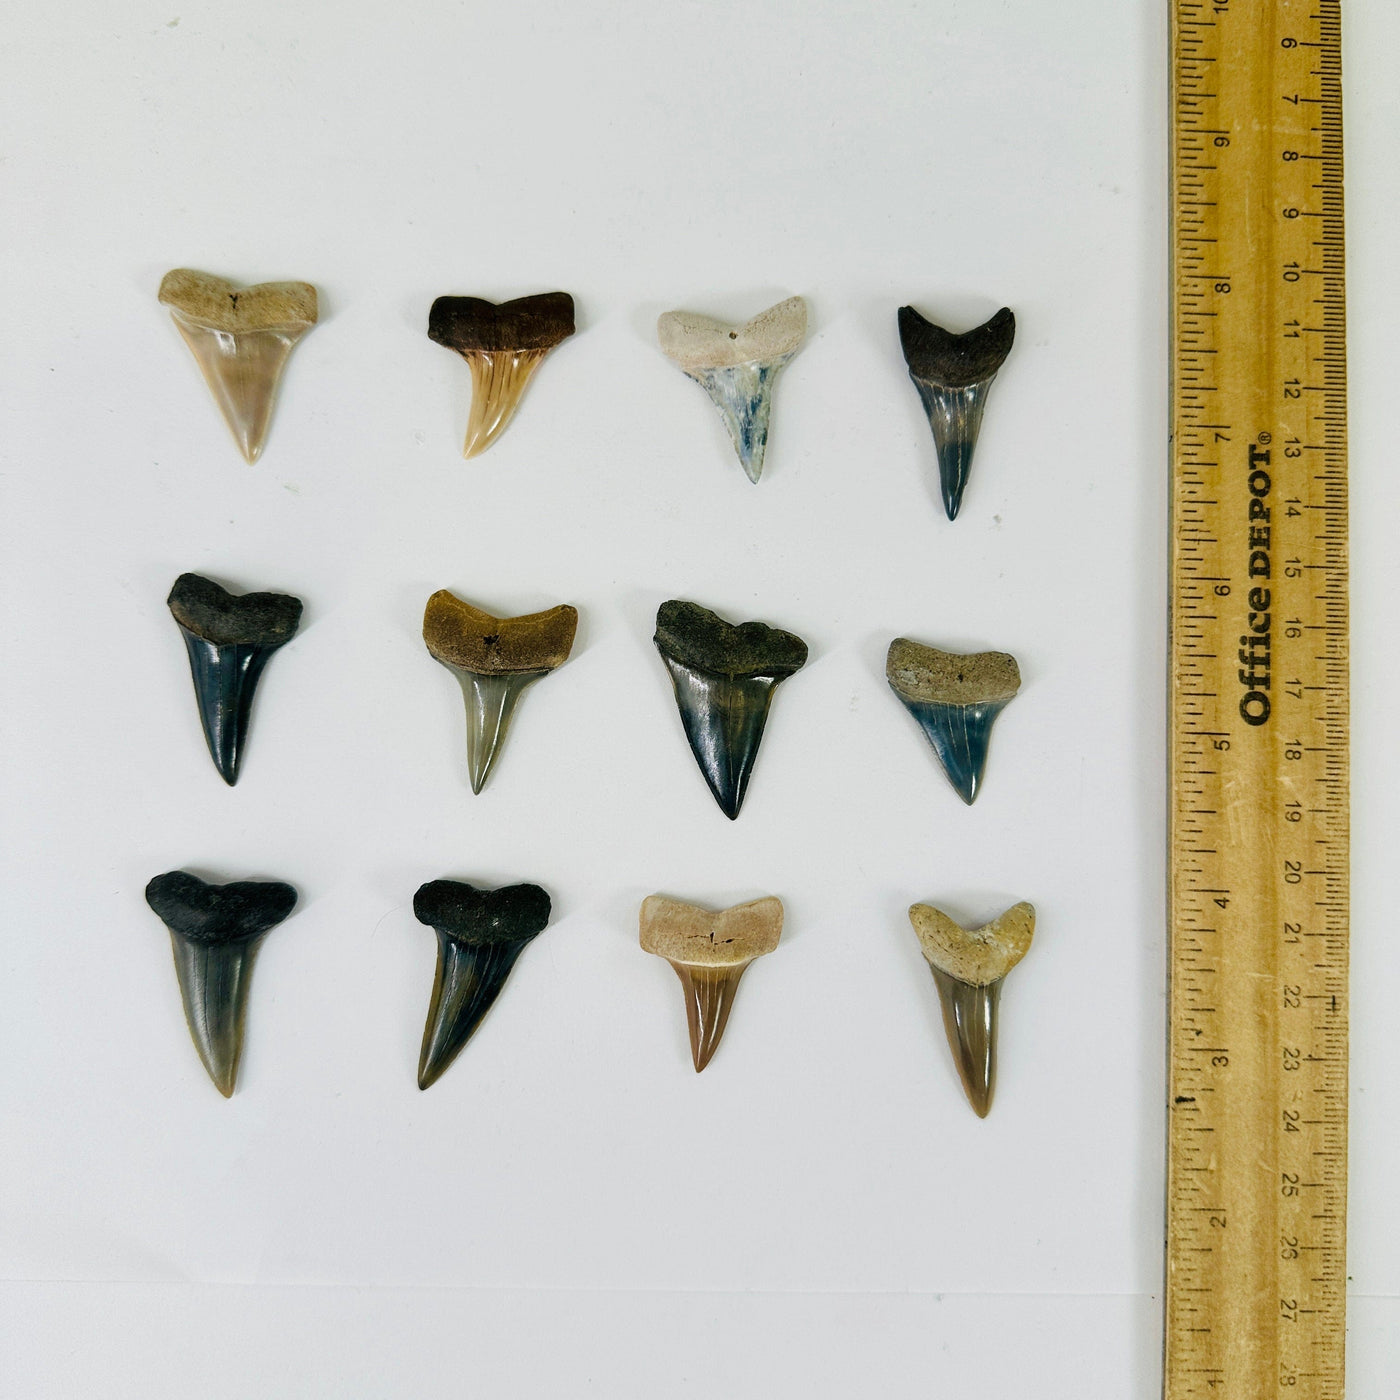 Mako Shark Teeth - Fossilized Polished Shark Teeth - You Choose all variants next to ruler for size reference